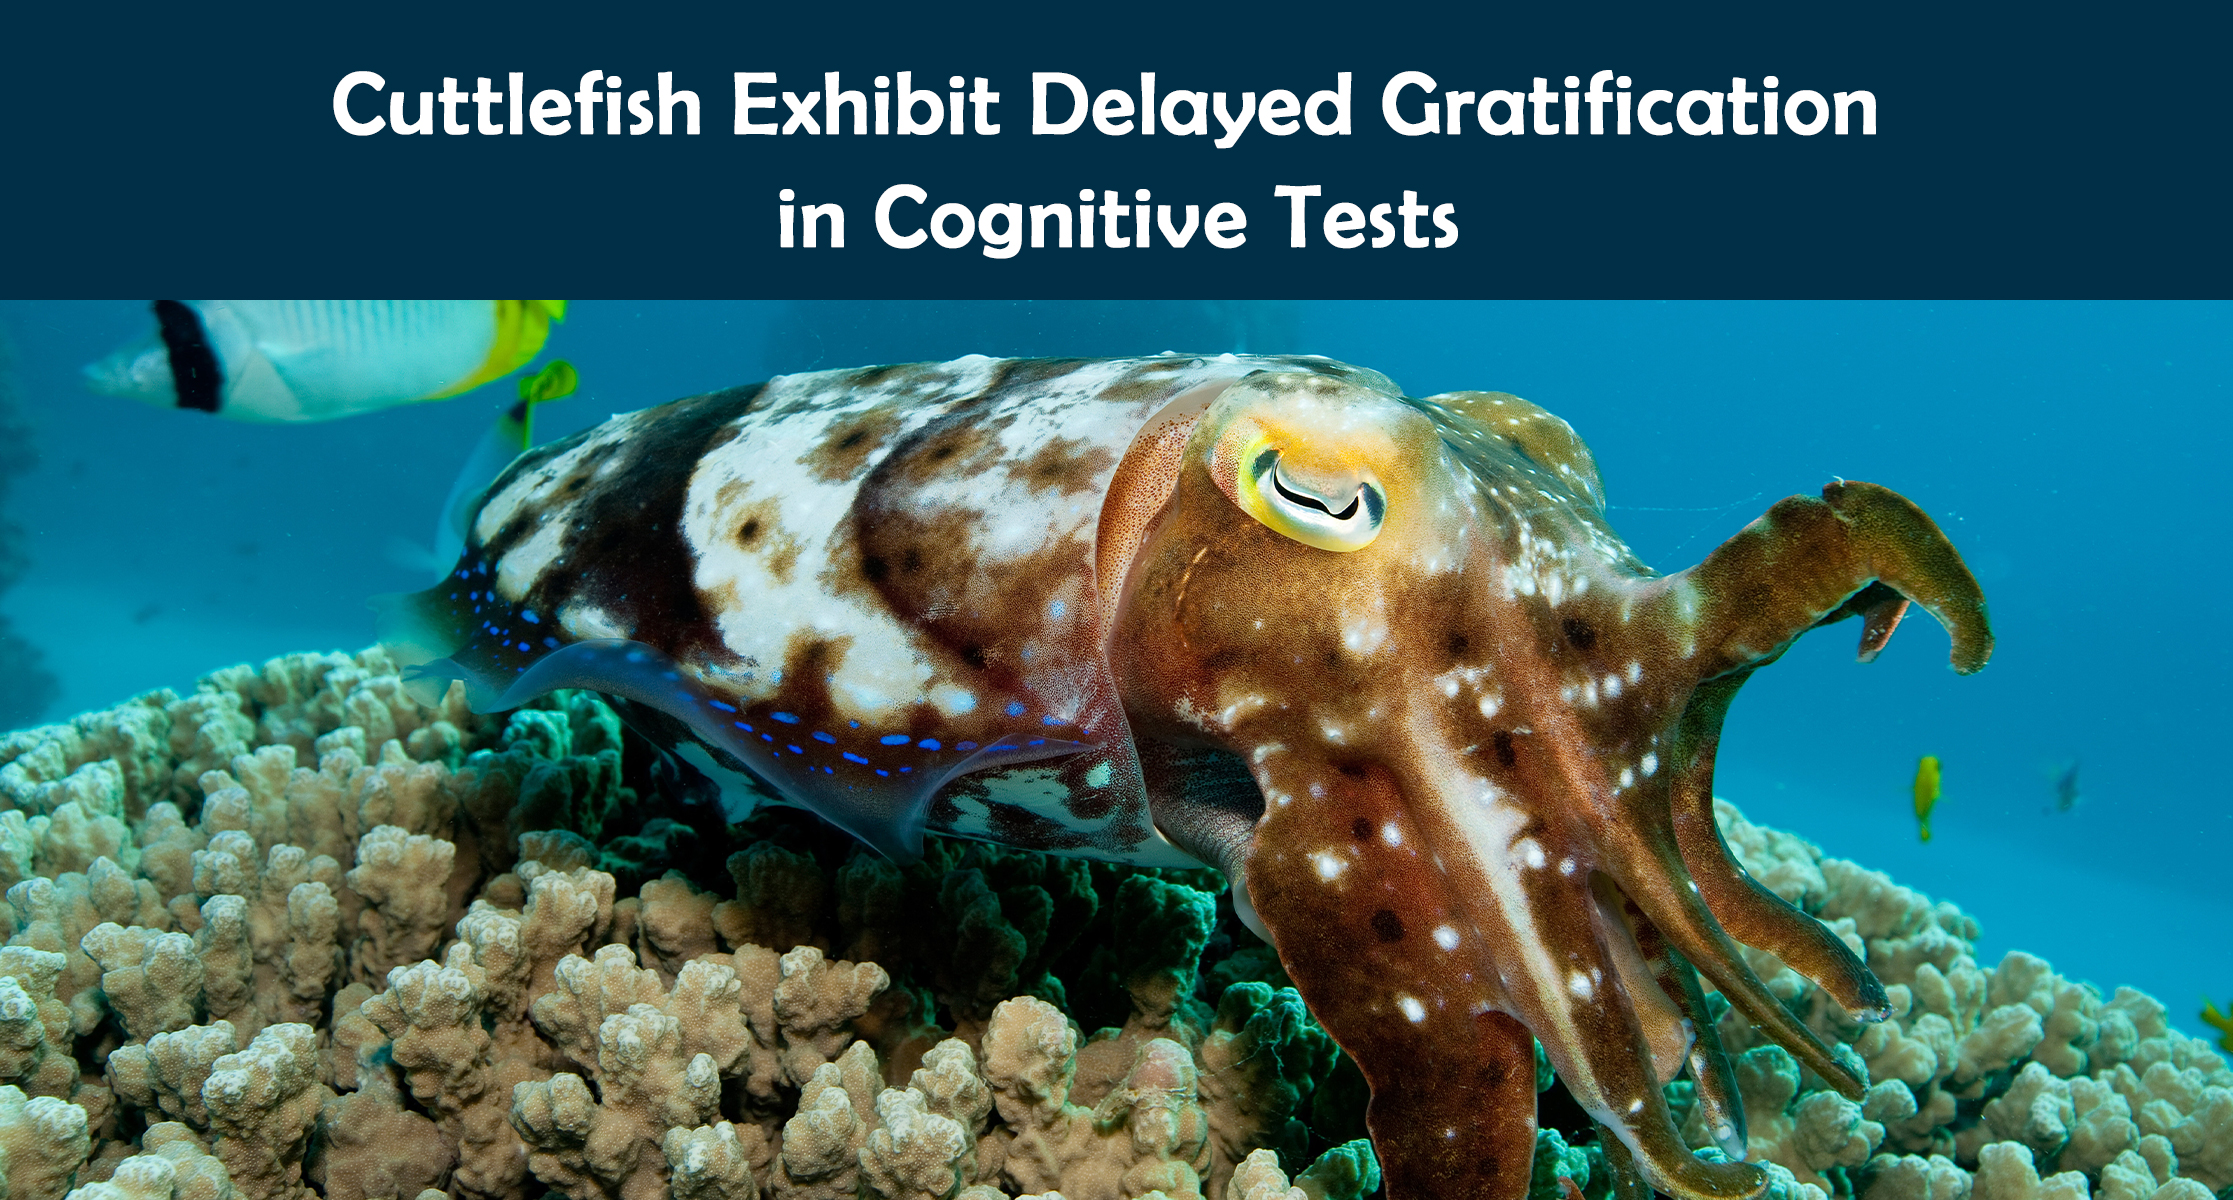 Cuttlefish Exhibit Delayed Gratification in Cognitive Tests